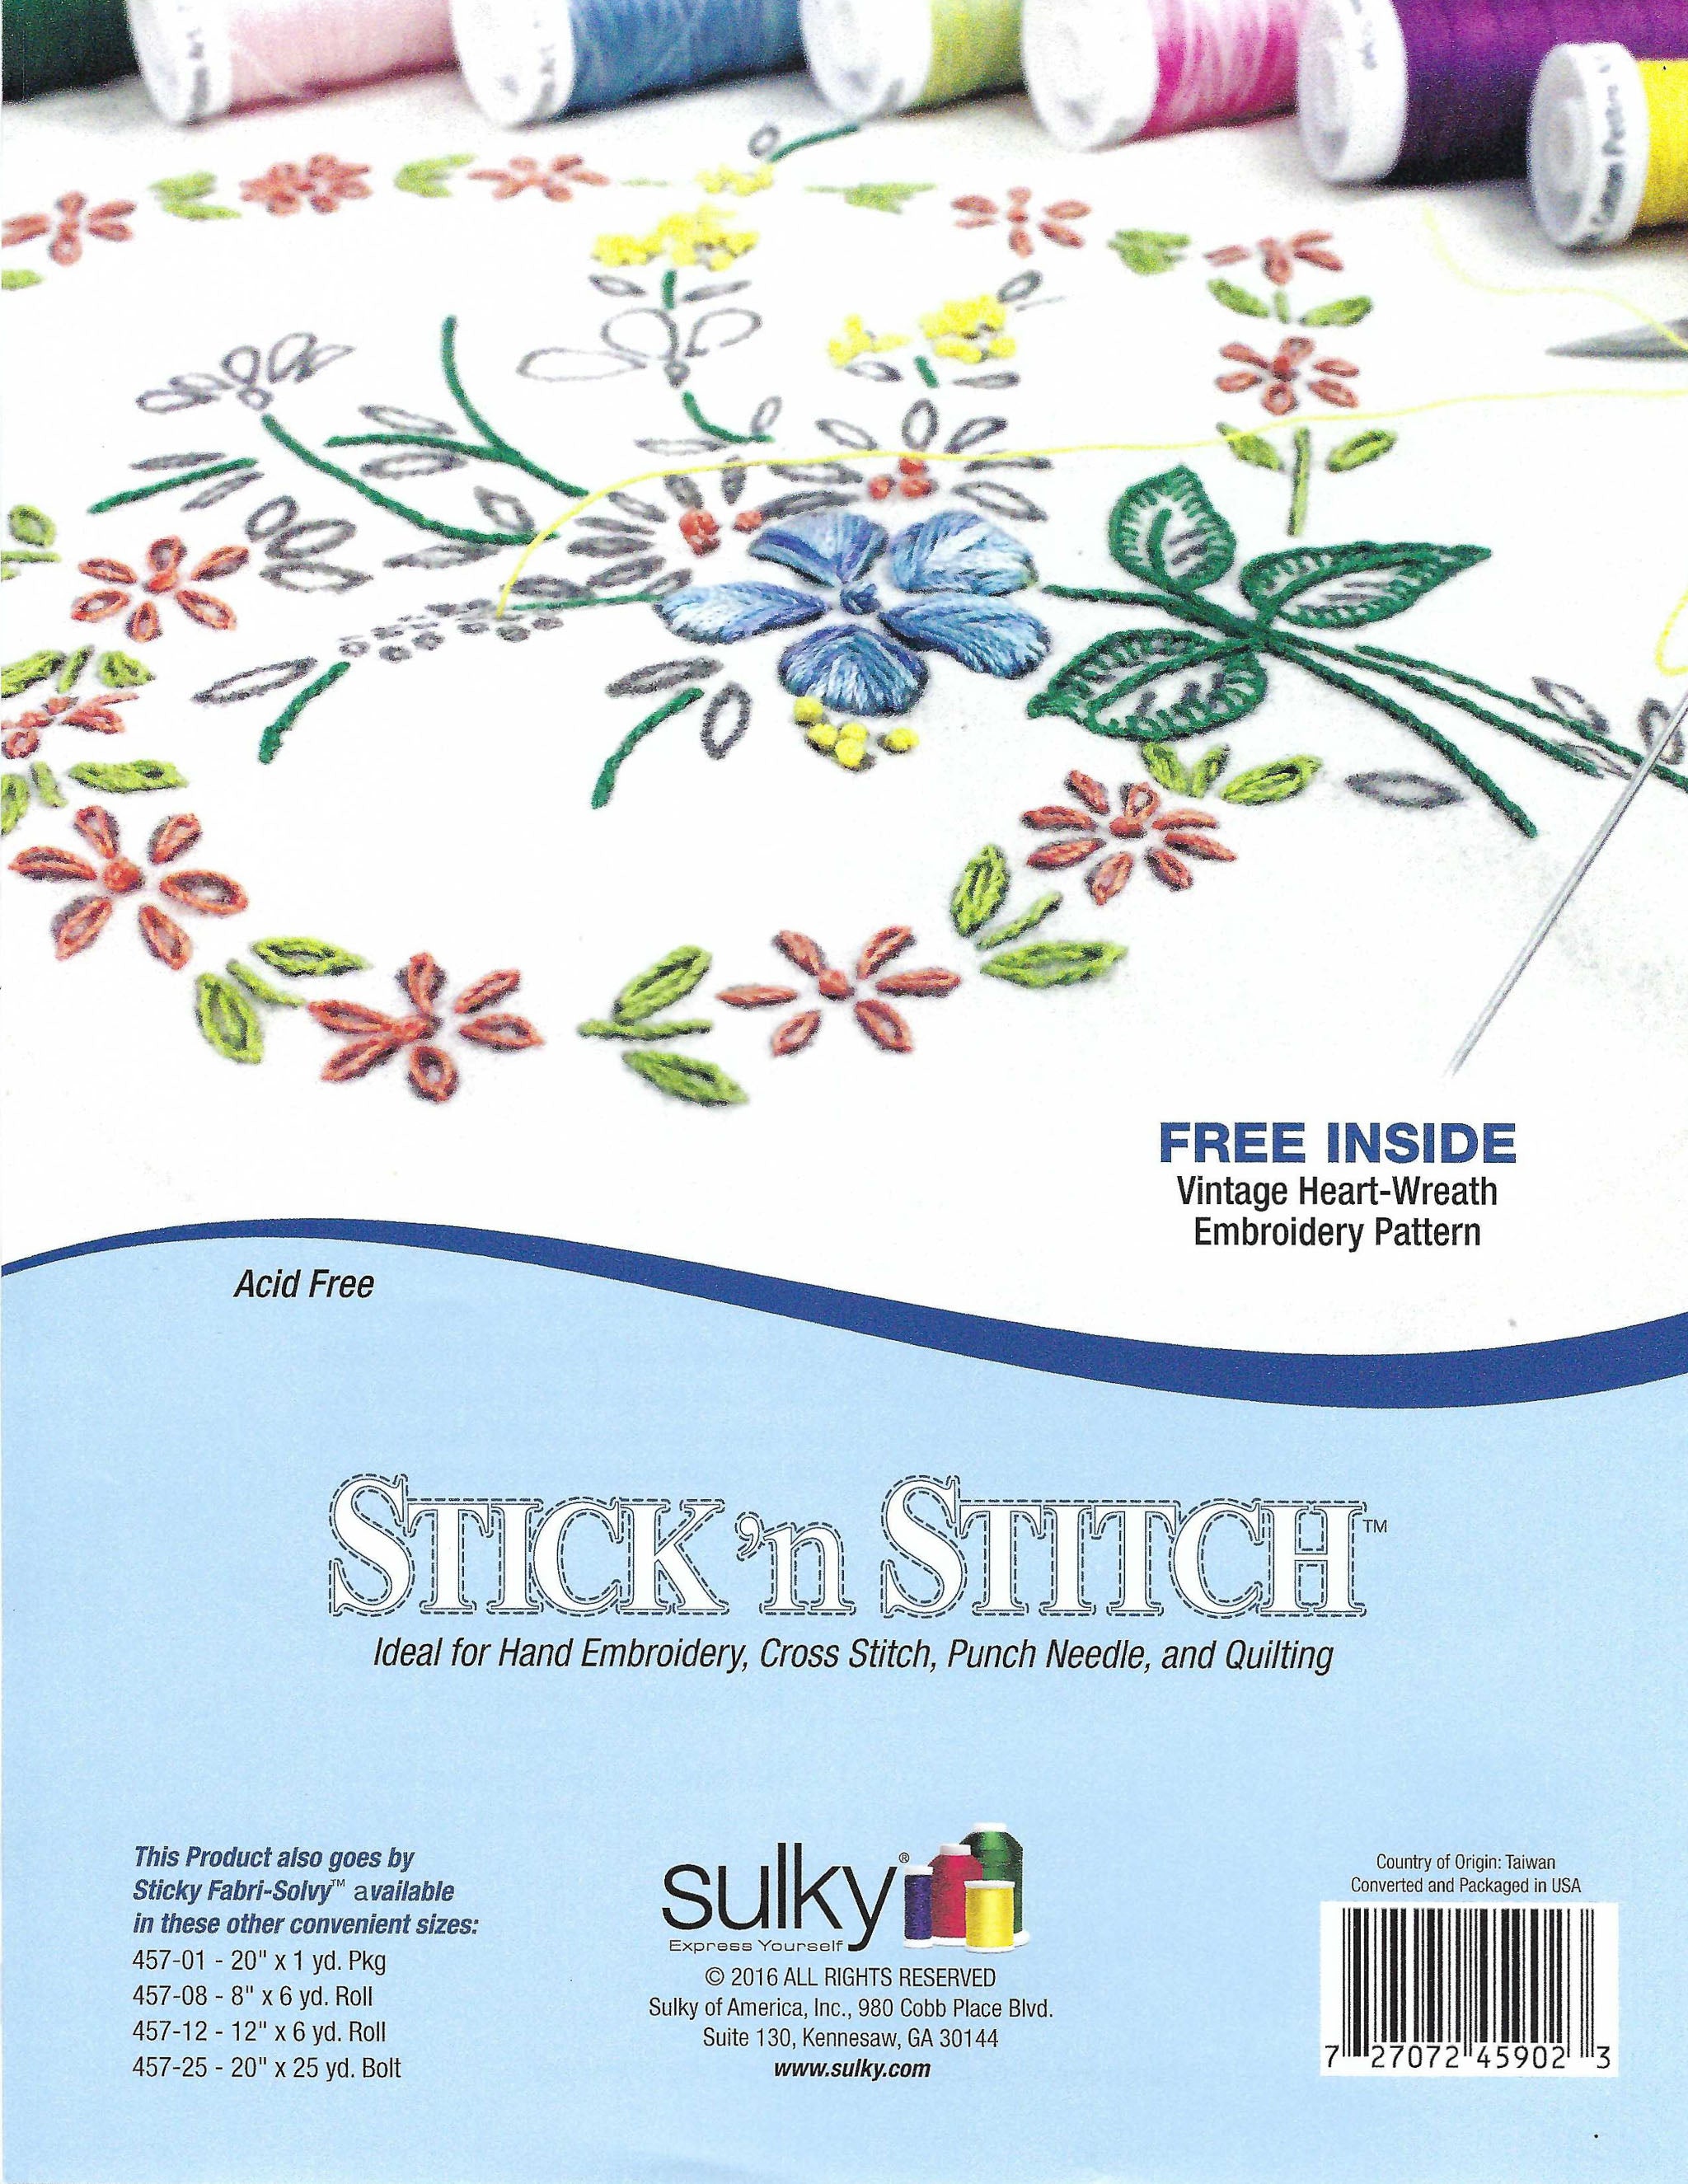 4 simple steps to using Sulky Sticky + self-adhesive stabilizer